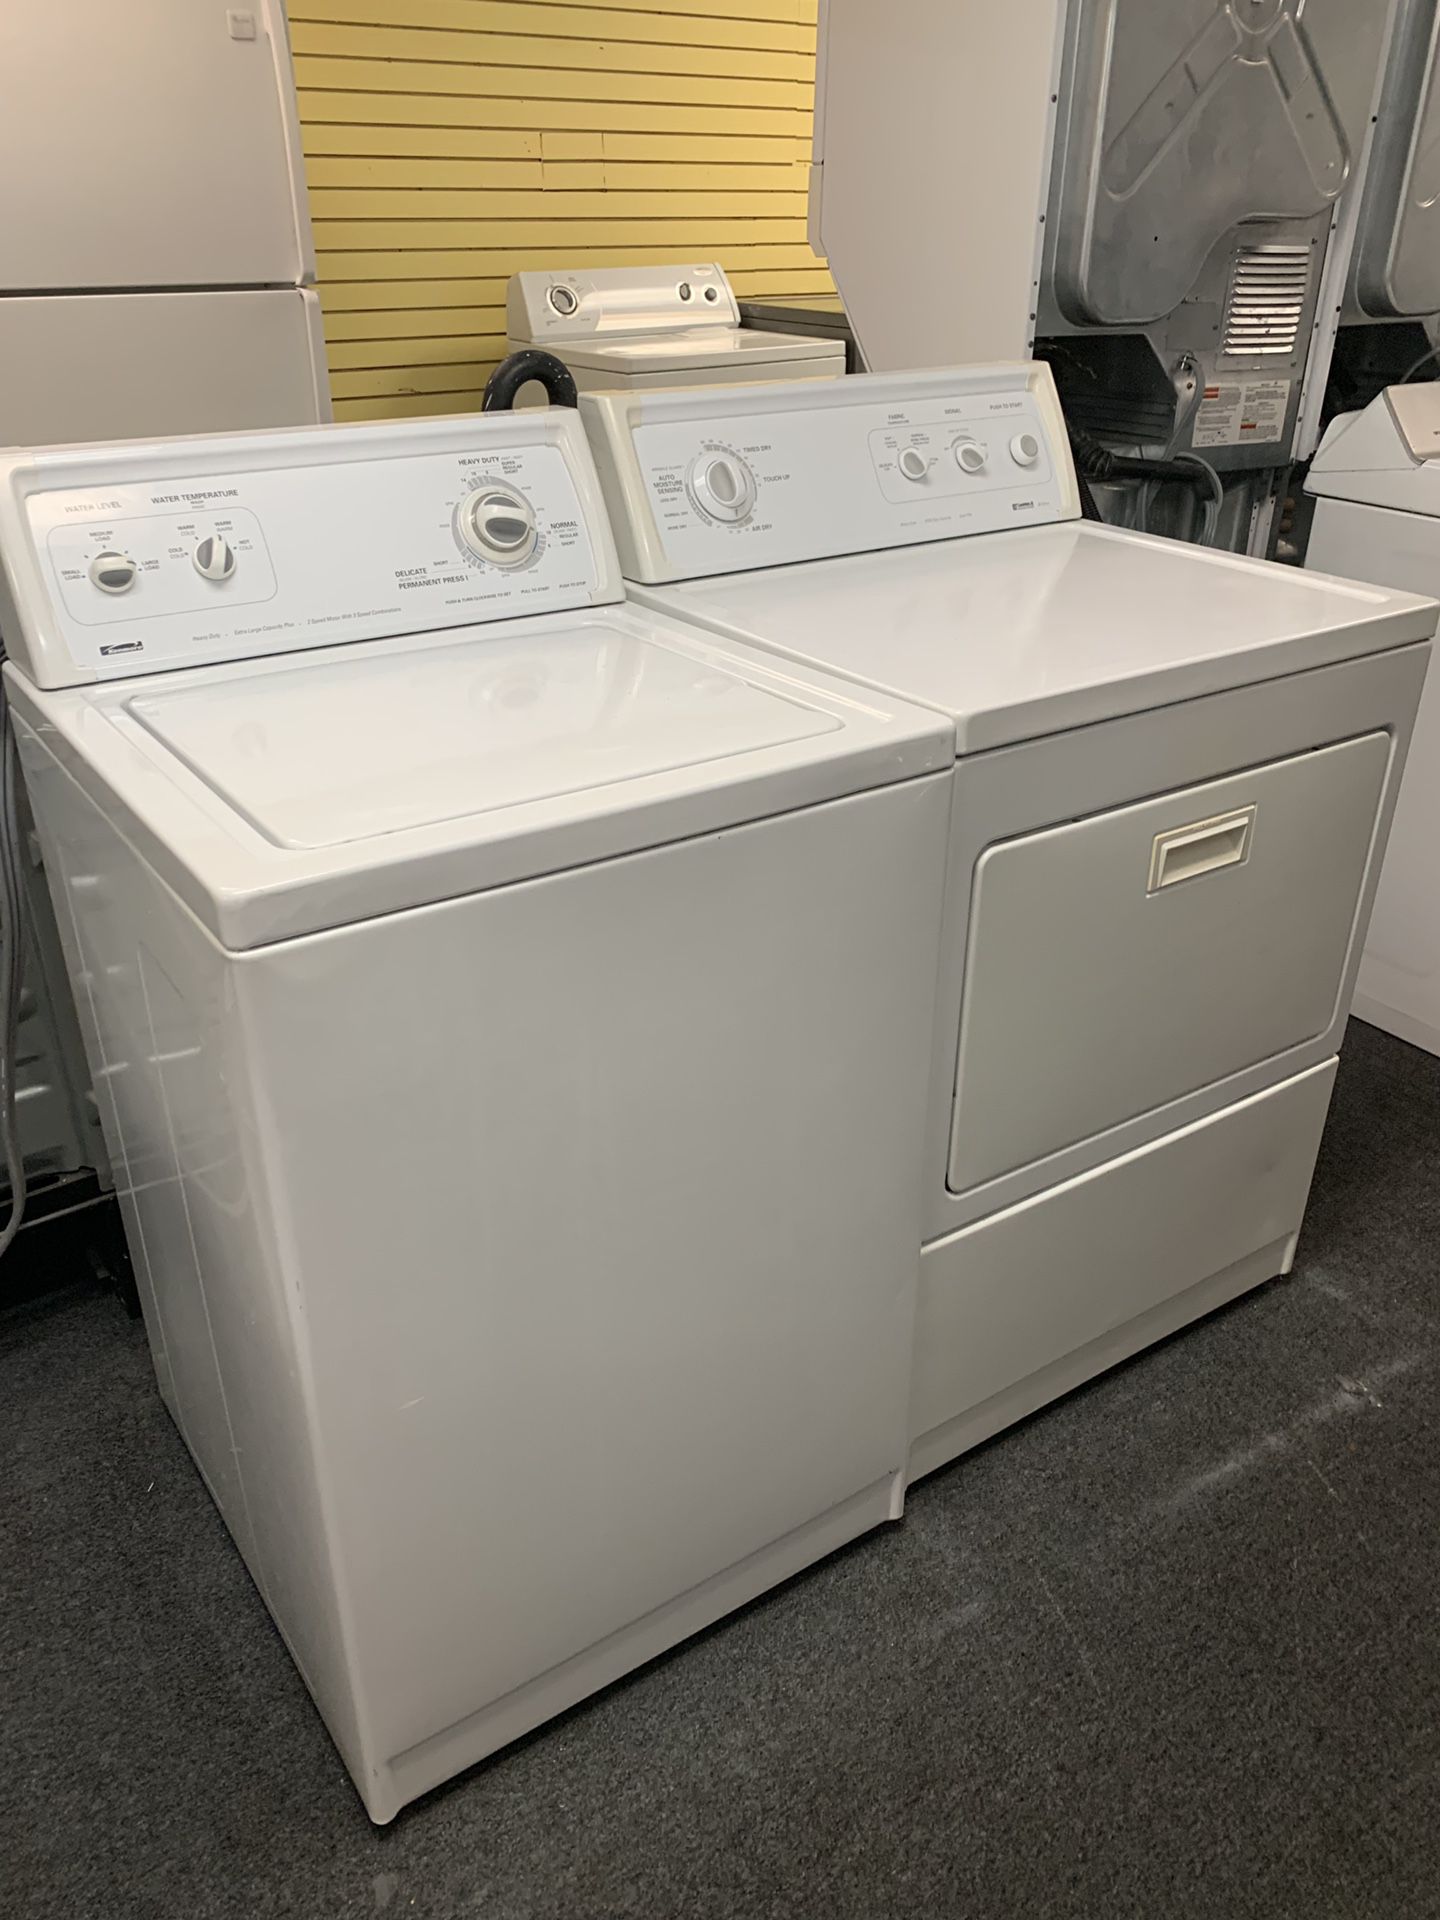 Kenmore, Top Load Washer and Electric Dryer Set, Used in Excellent Condition, 90 Day Warranty